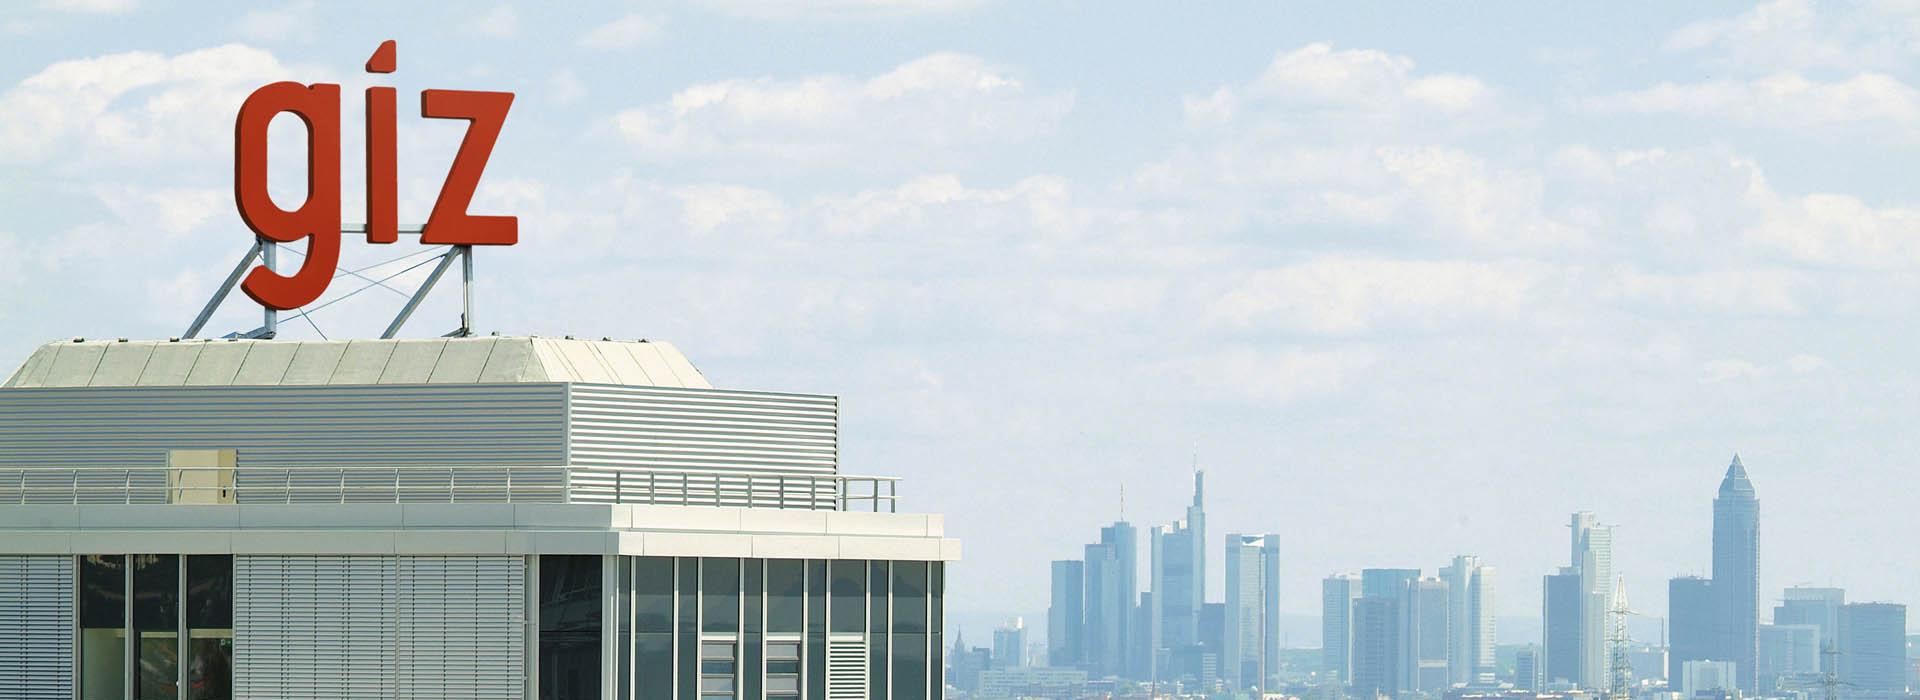 Frankfurt skyline as seen from Eschborn with GIZ building in foreground